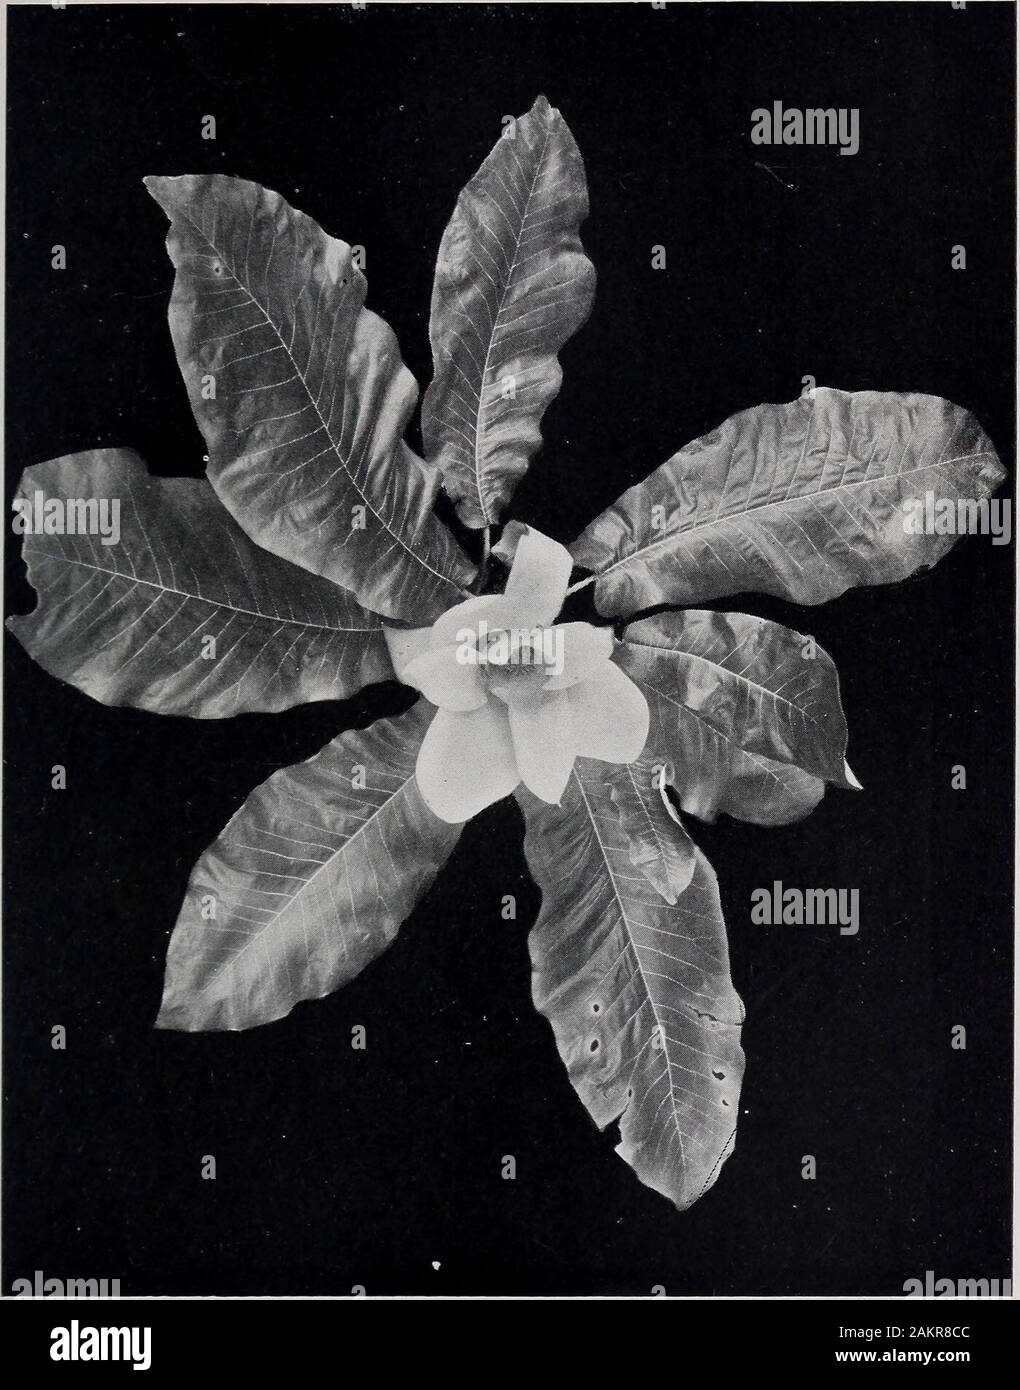 Annual report of the trustees of the American Museum of Natural History for the year . ntrance to the forestry hall and has at-tracted much attention. As a whole, it is 43 inches in width,the largest leaf measuring 21 inches, and the flower 9 inches. Among other sprays worked on during the year the follow-ing were put on exhibition: black maple {Acer nigrum) ; redash {Fraxinus Pennsyhanicum); black oak {Quercus velu-tina) ; and Arizona sycamore {Platanus Wrightii). In connection with this work the cooperation of botanistsand foresters was enlisted in supplying the fresh material forthe reprodu Stock Photo